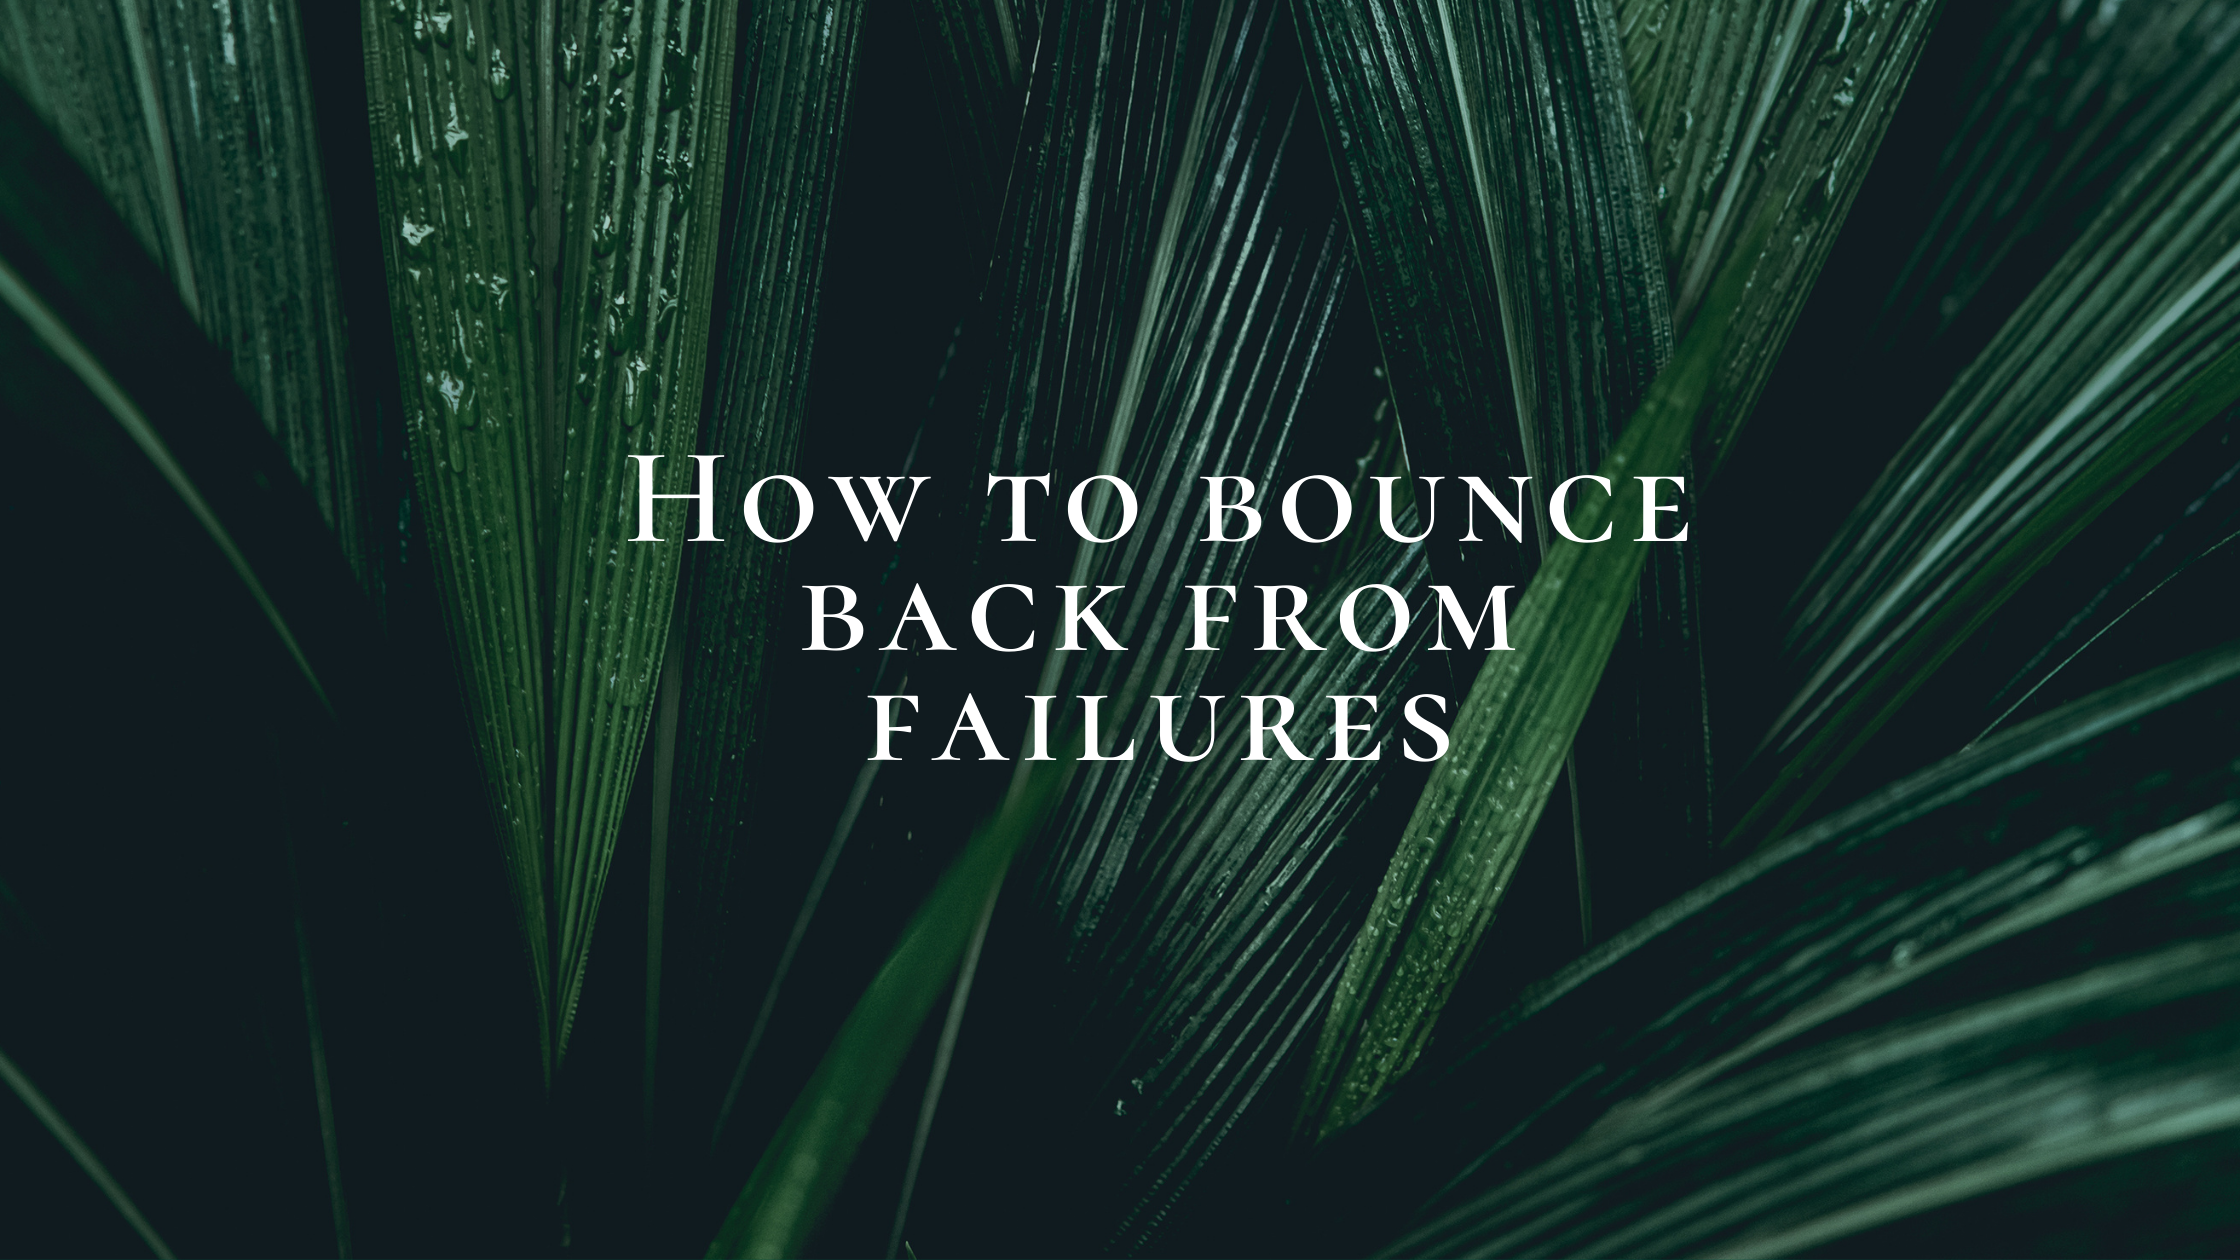 How to bounce back after failure